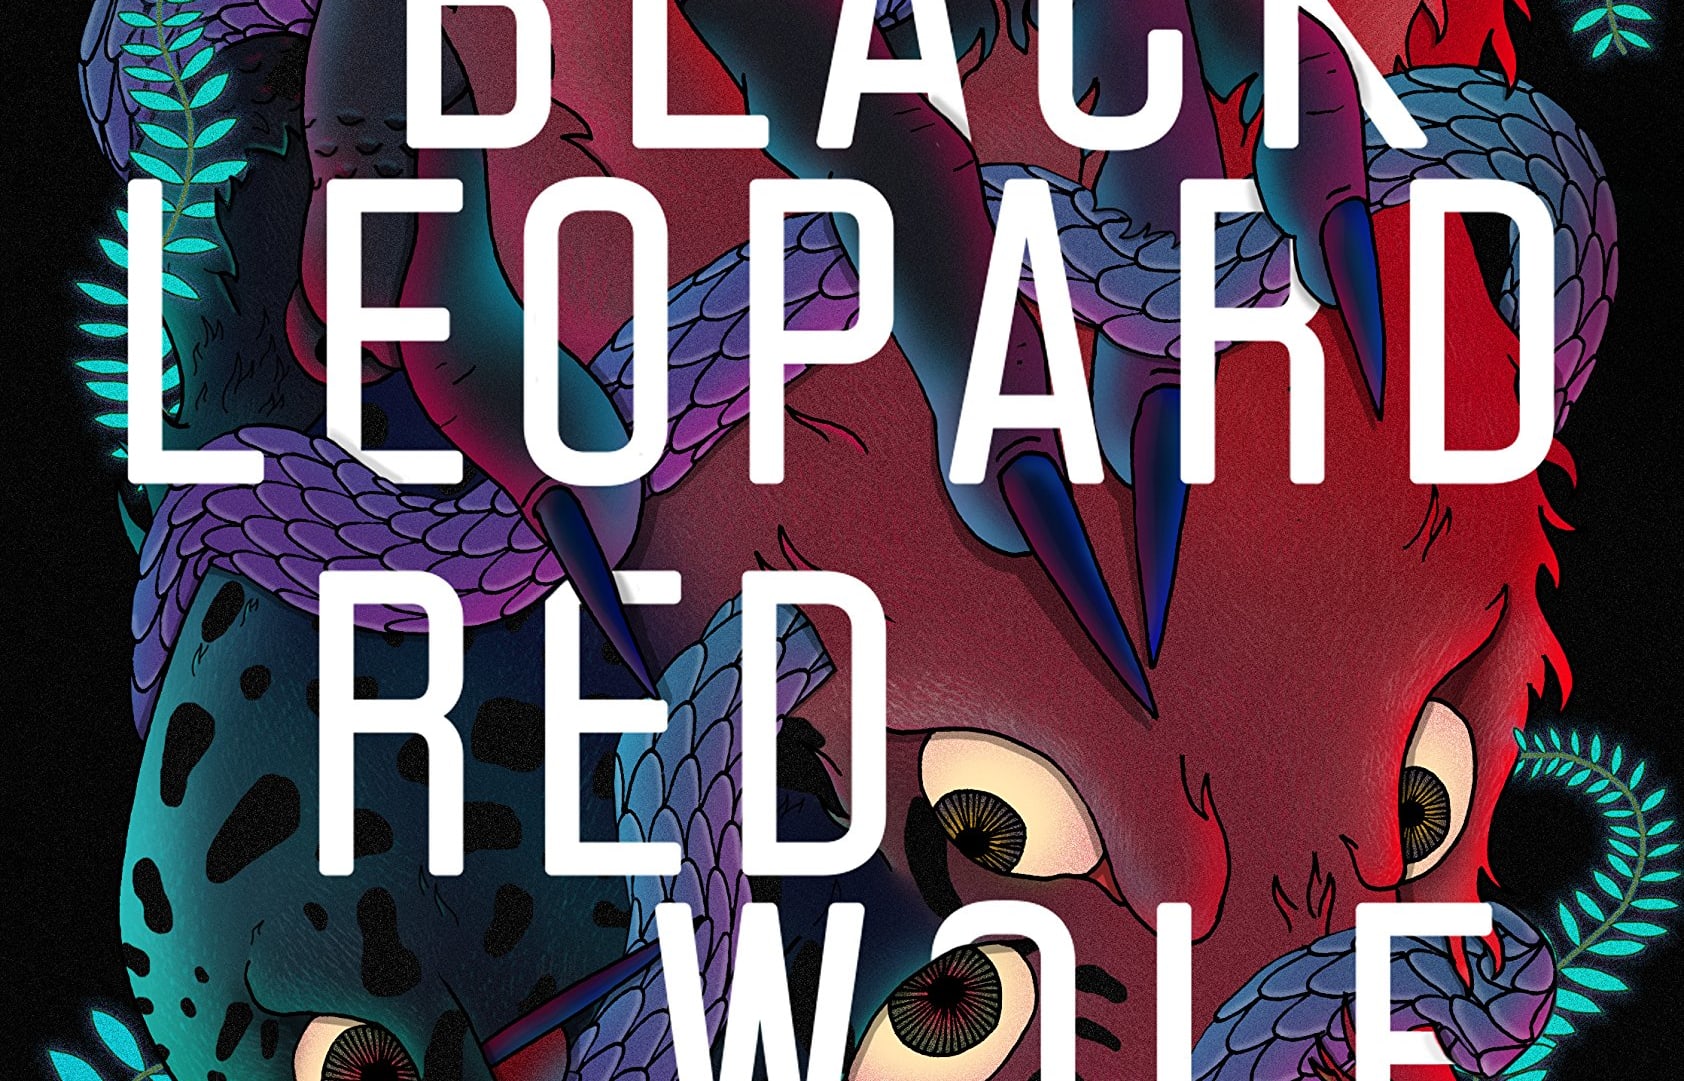 cover of the book "Black Leopard, Red Wolf" by Marlon James